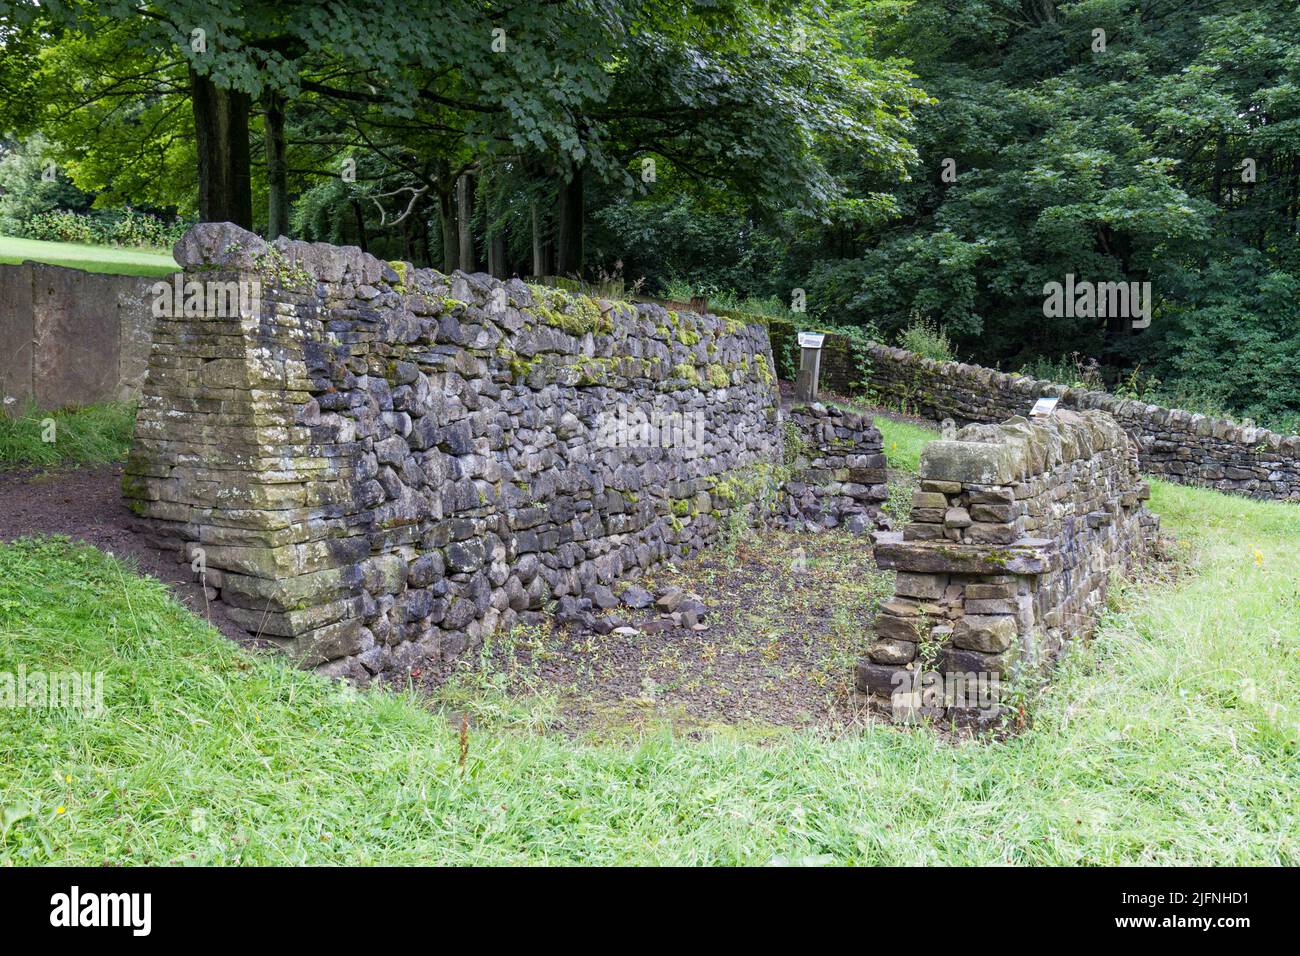 Example of retaining and training dry walls, part of a dry stone walling exhibit, Shibden Park, Halifax, Yorkshire, UK. Stock Photo